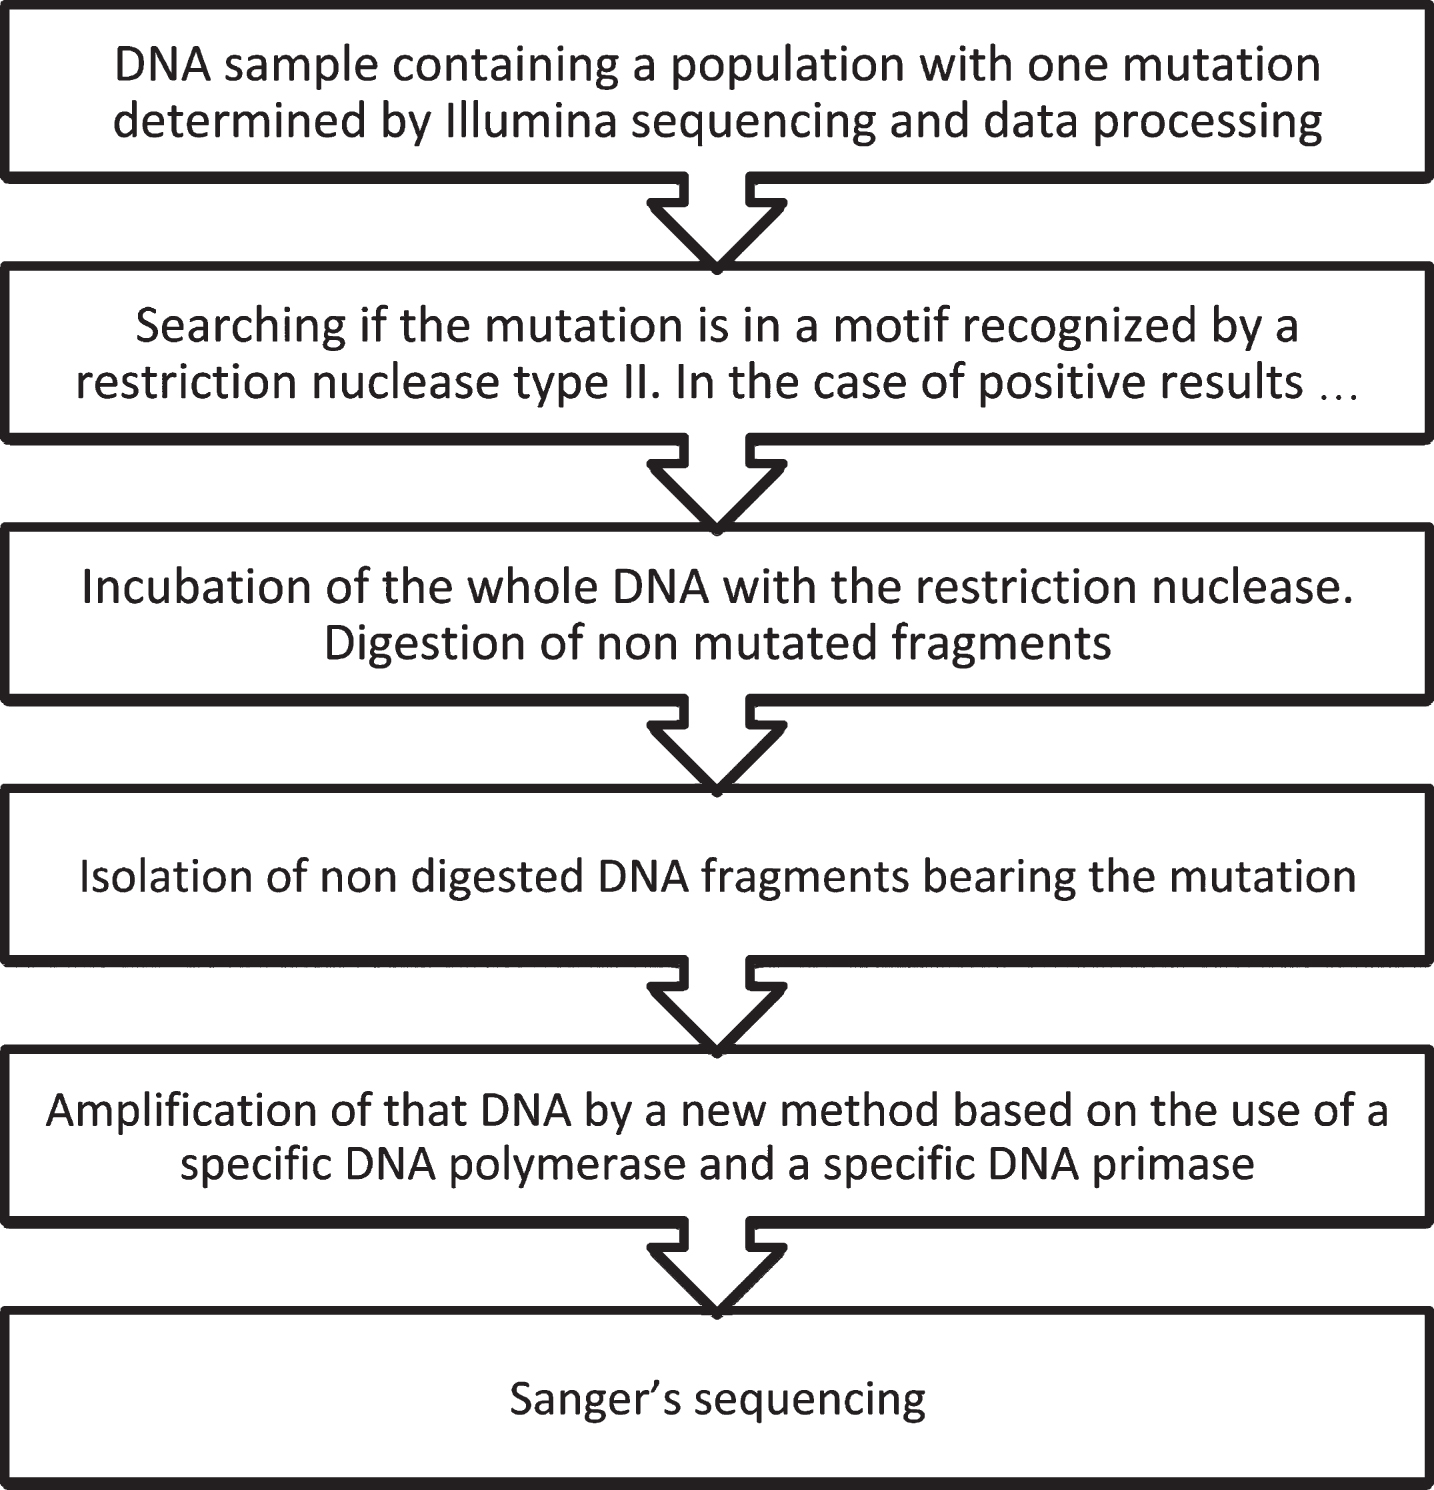 Schematic diagram of the method for validating somatic mutations in the brain characterized by Illumina sequencing.